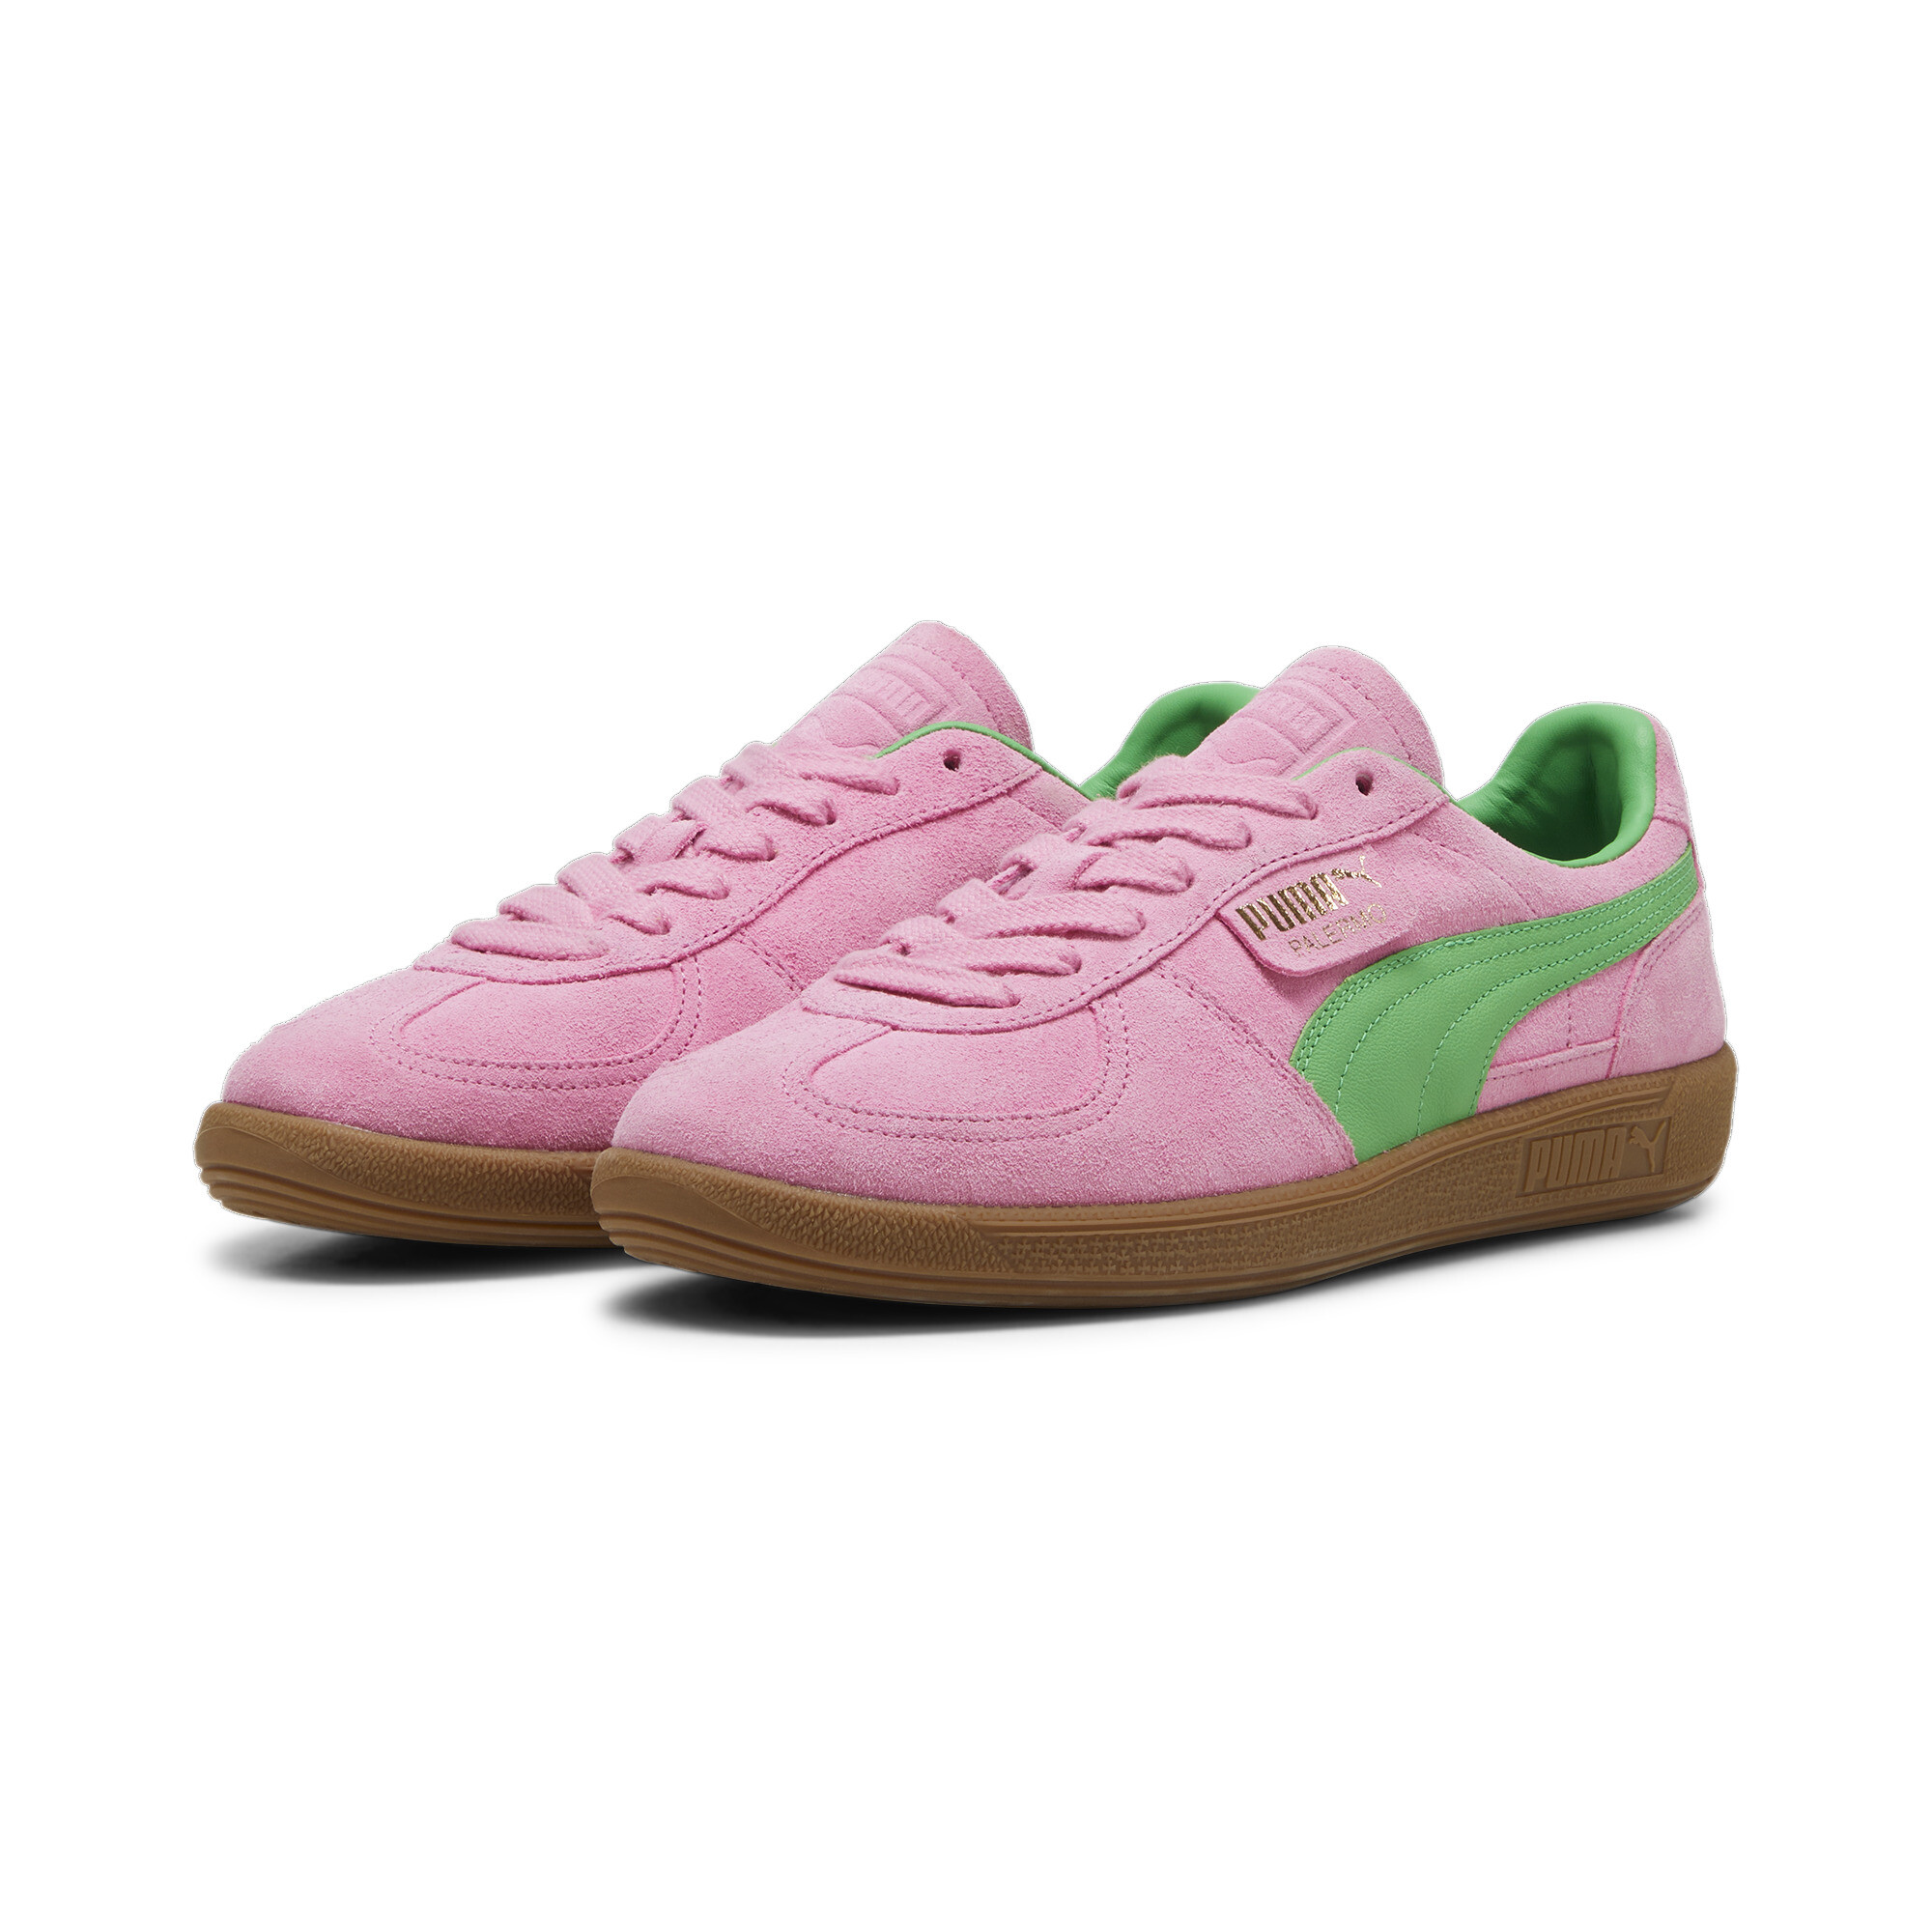 Men's PUMA Palermo Special Shoes In Pink, Size EU 40